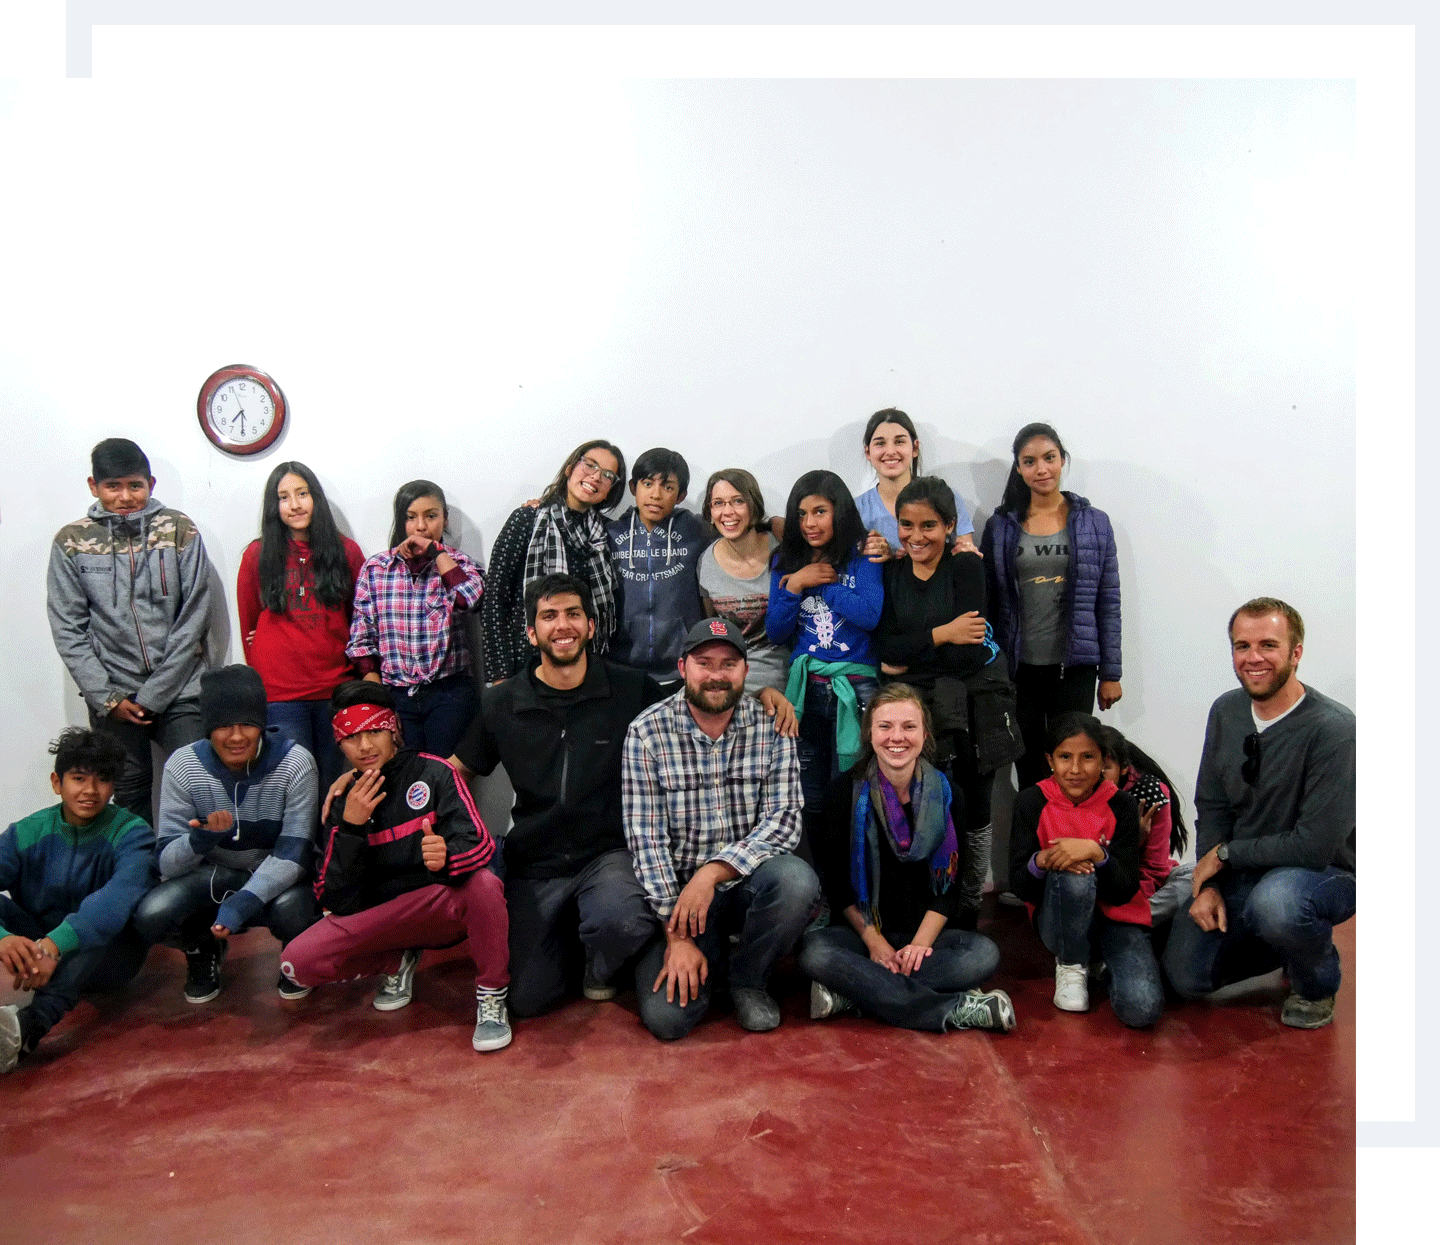 First teen ministry group in Cachi